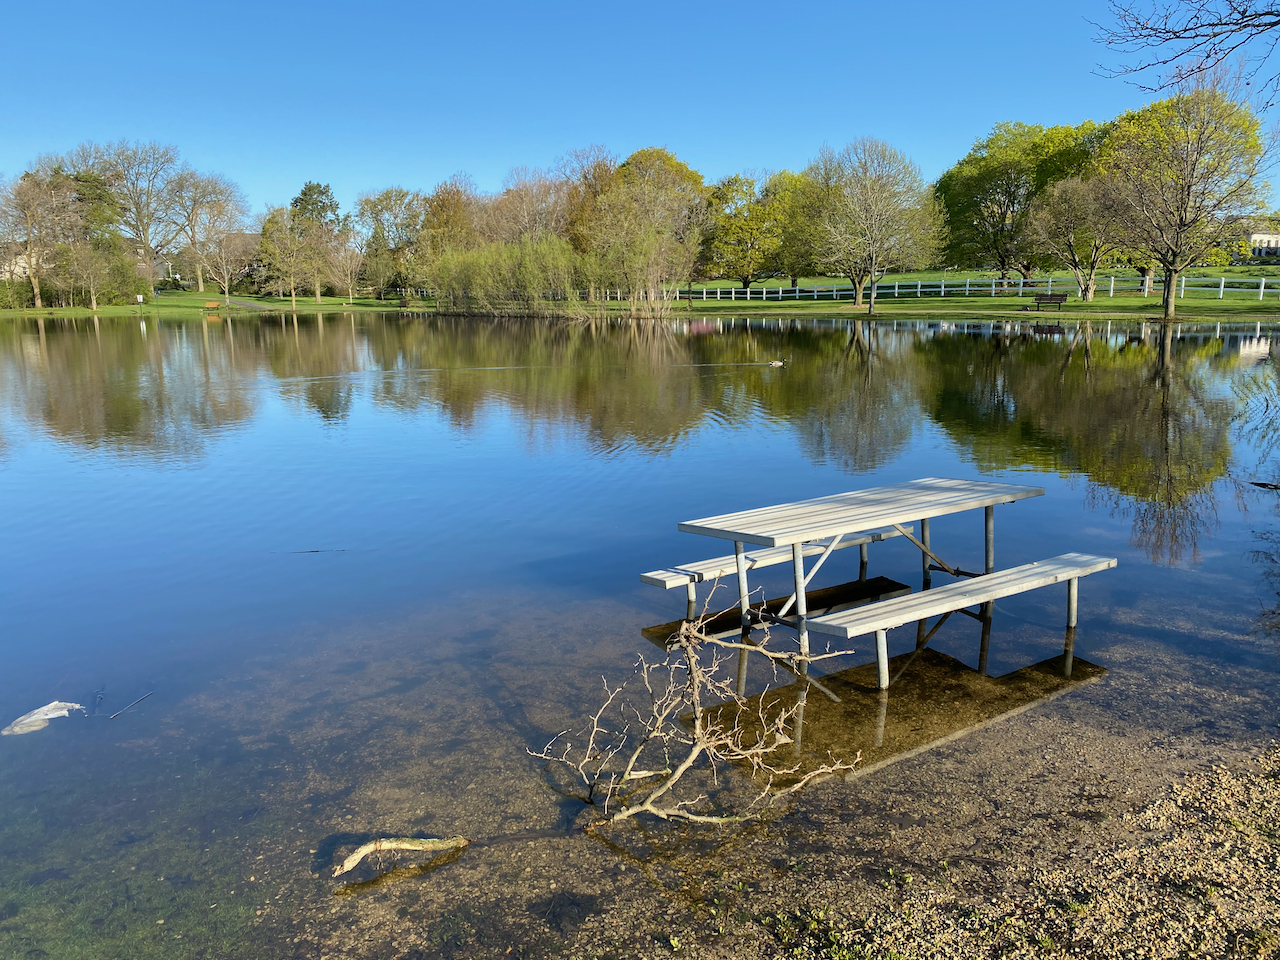 A picnic table sits in water at the edge of a pond.